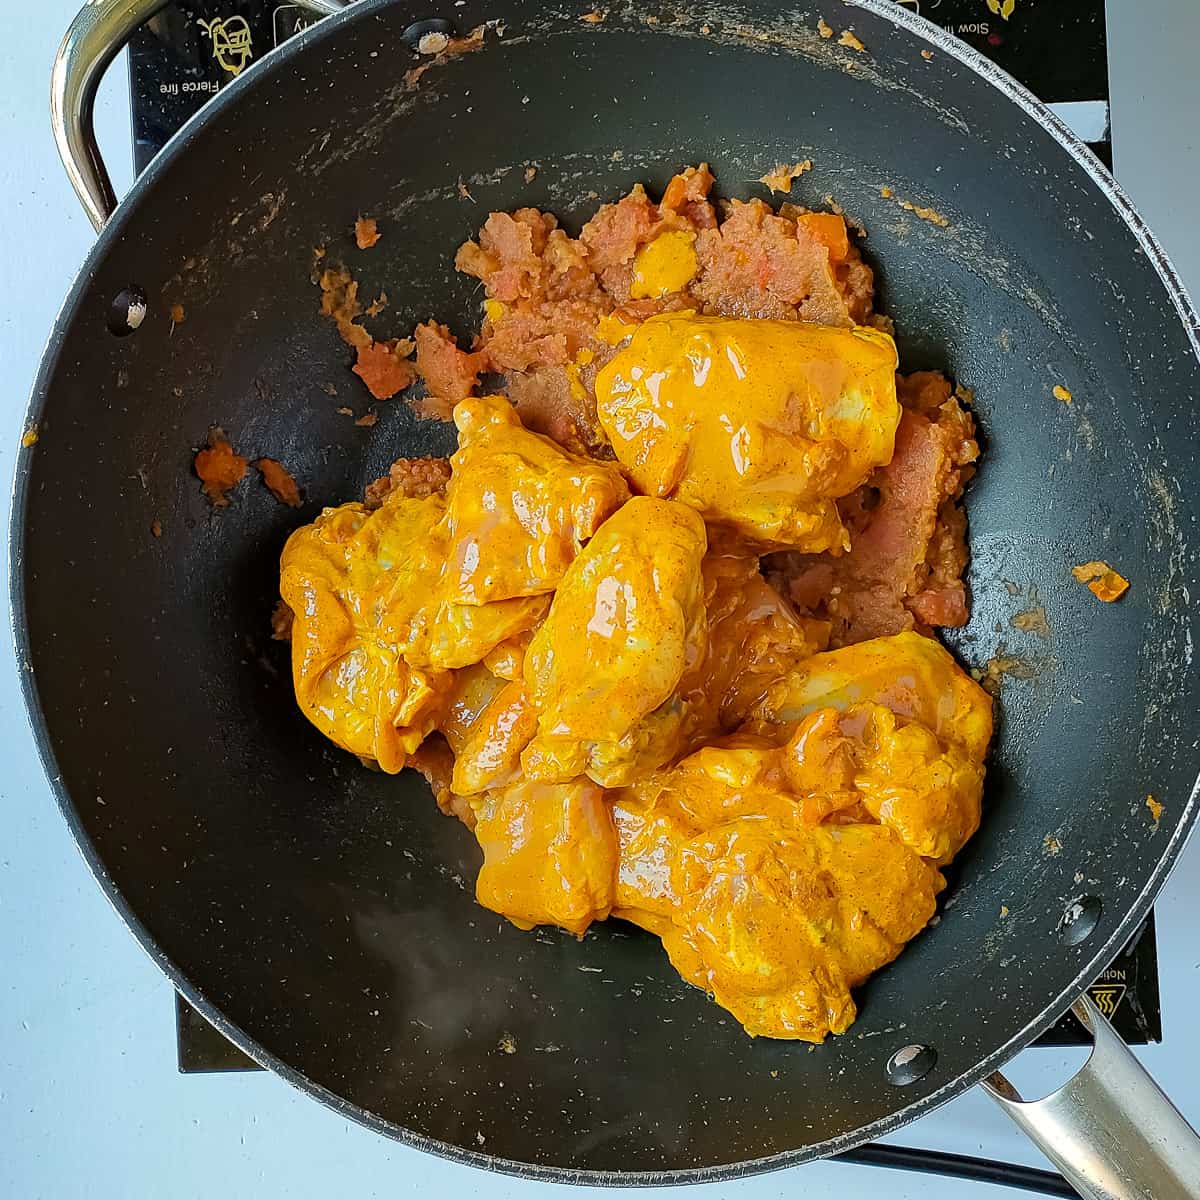 Marinated chicken being sauteed in a wok